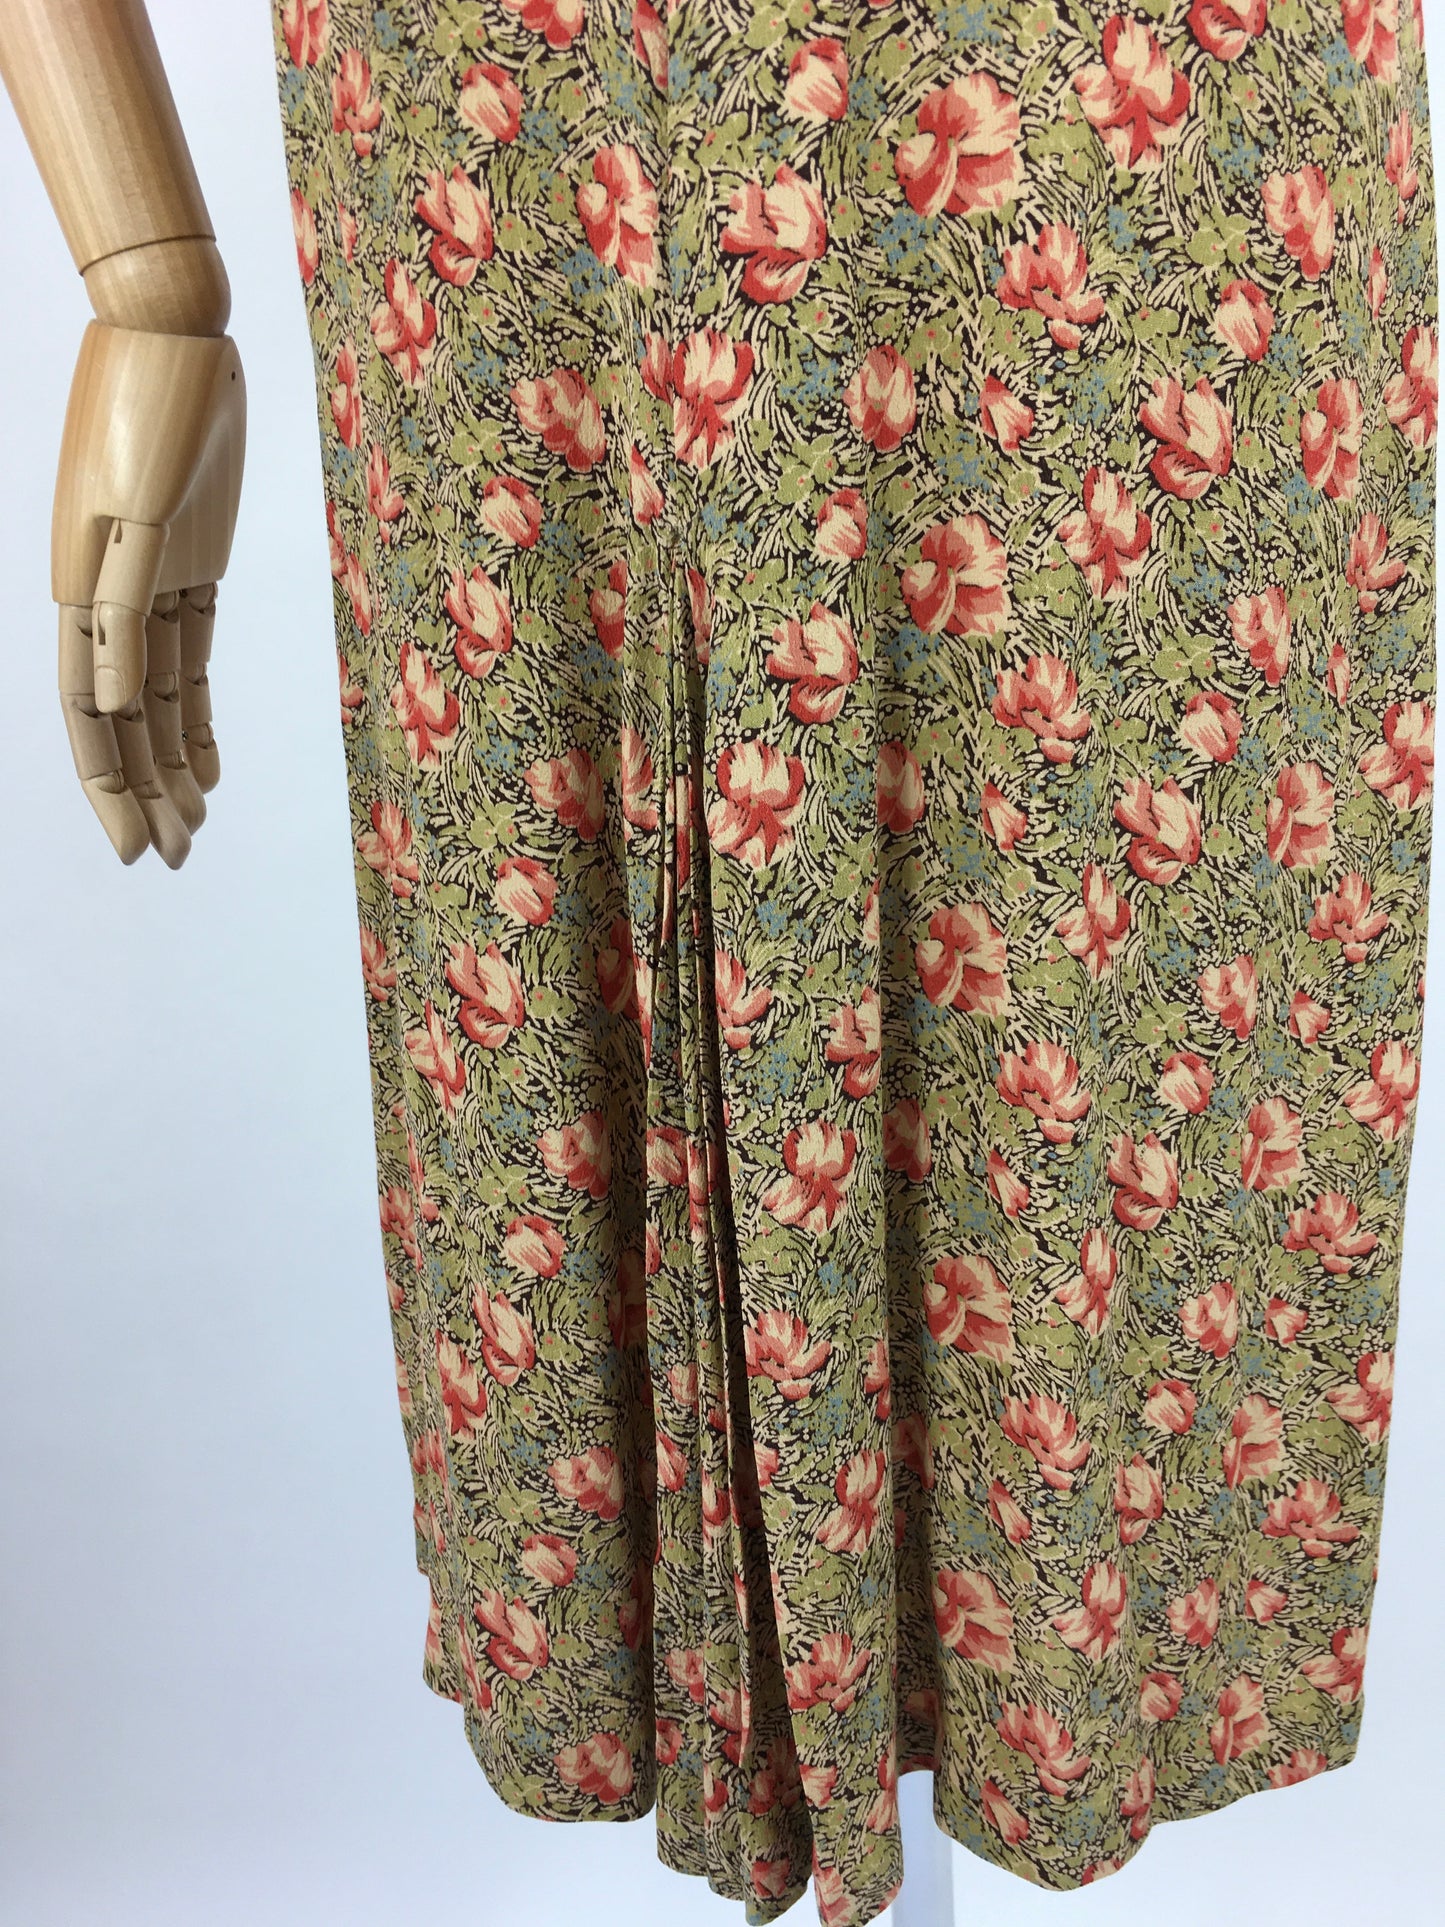 Original 1930s Exquisite Dress - In a Breathtaking Colour Palette Of Warm Rose Pinks and Reds, Tonal Greens and Powder Blues on a Floral Crepe